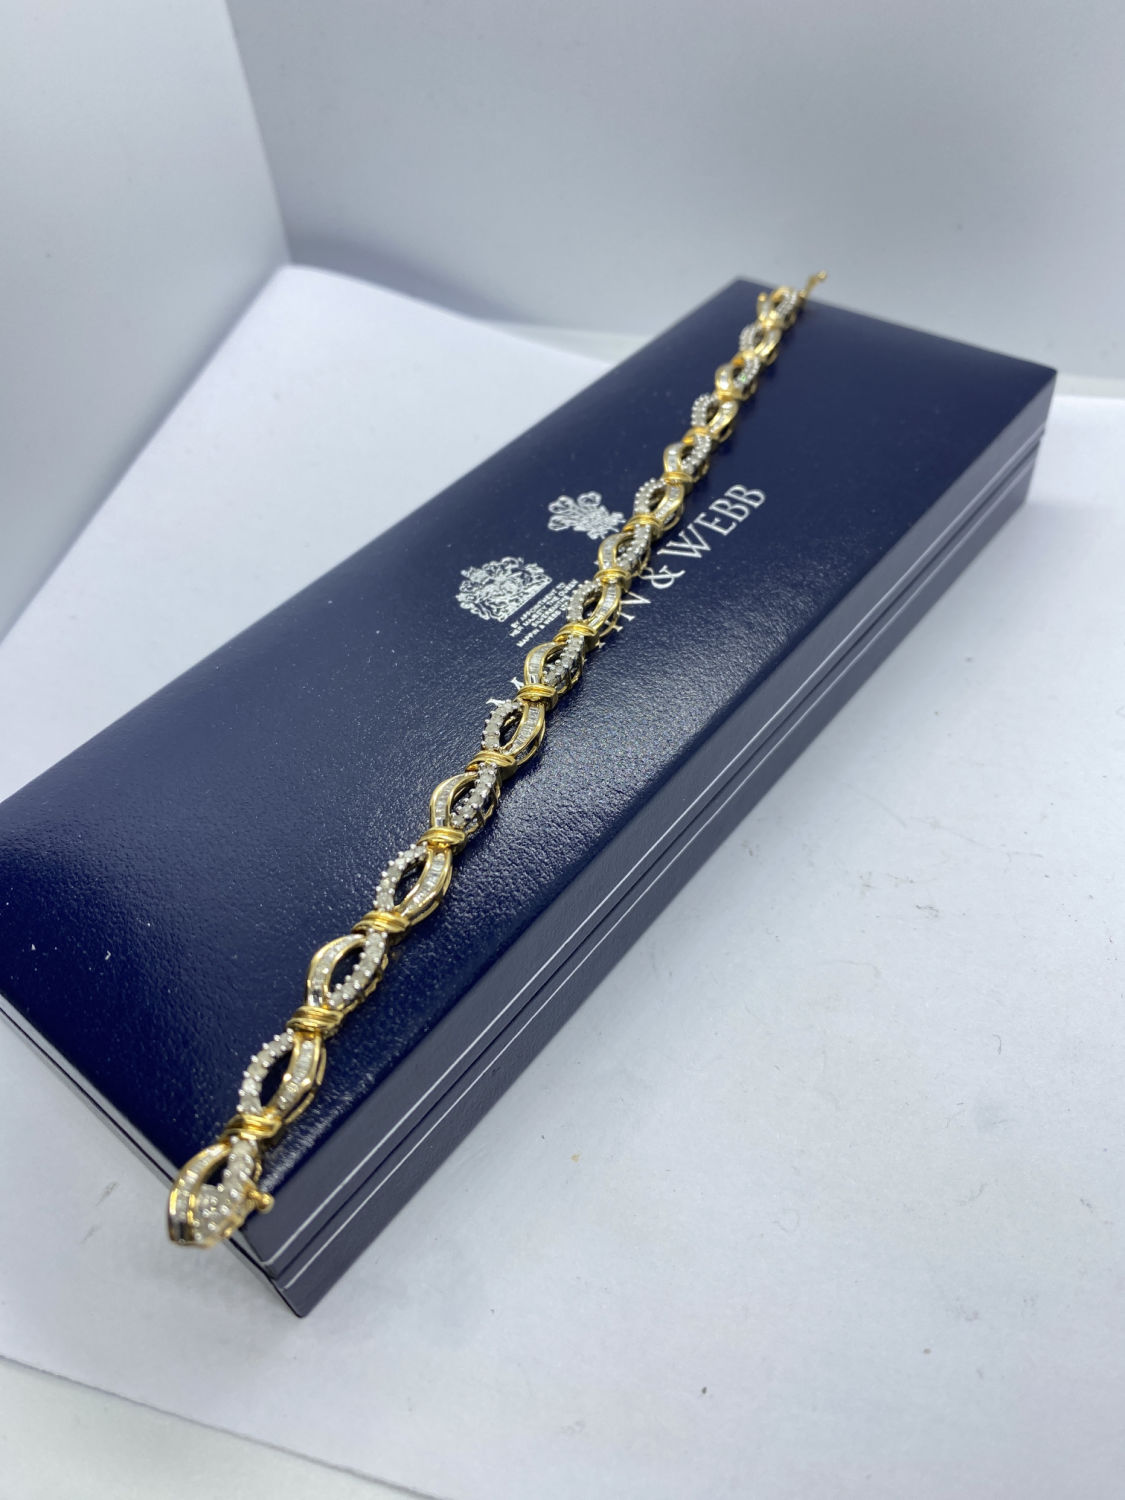 14CT YELLOW GOLD 3.50CT DIAMOND BRACELET WITH $3639 AIG VALUATION REPORT -